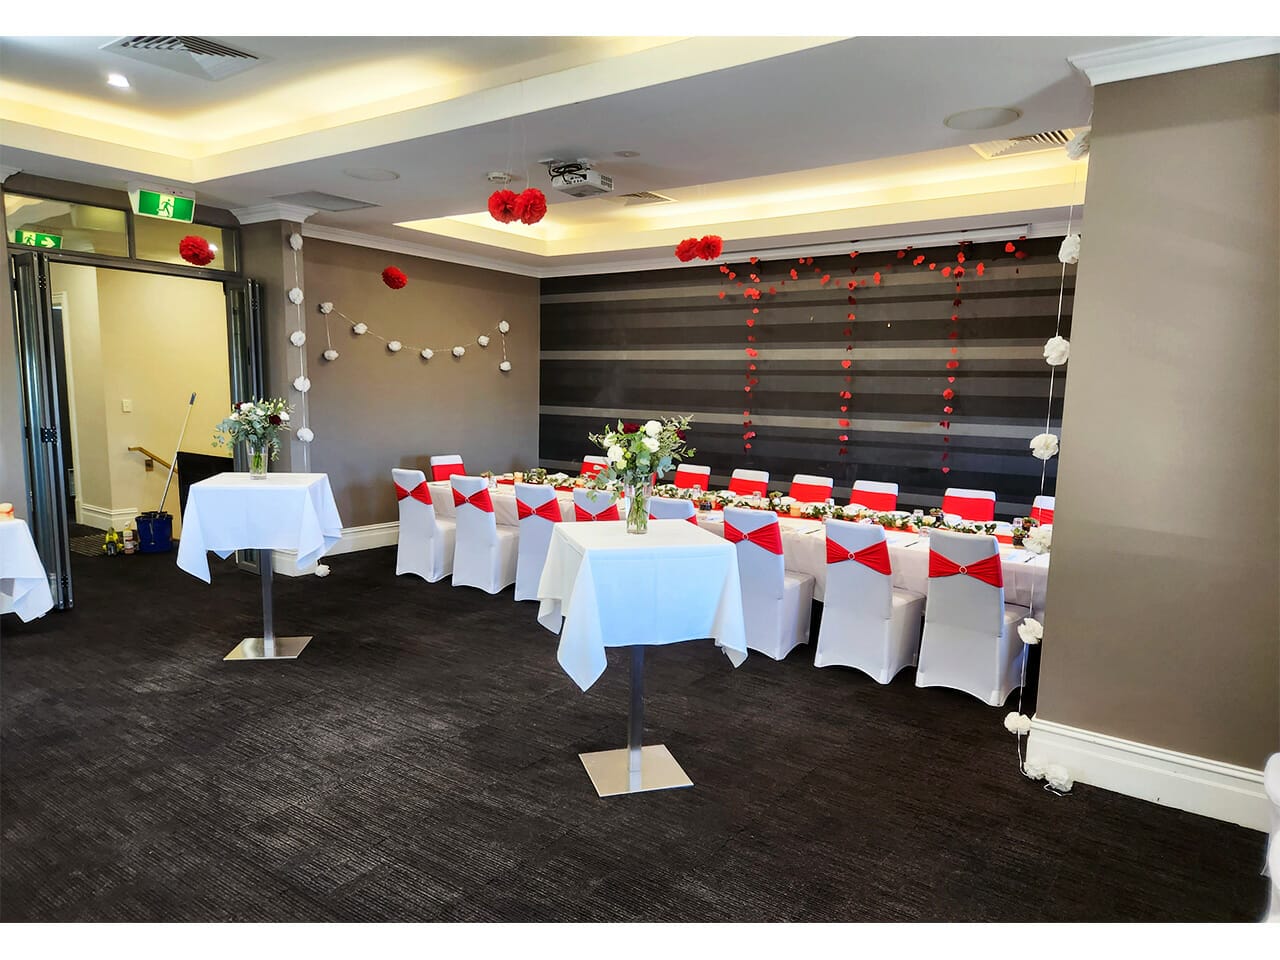 Event space for hire Adelaide